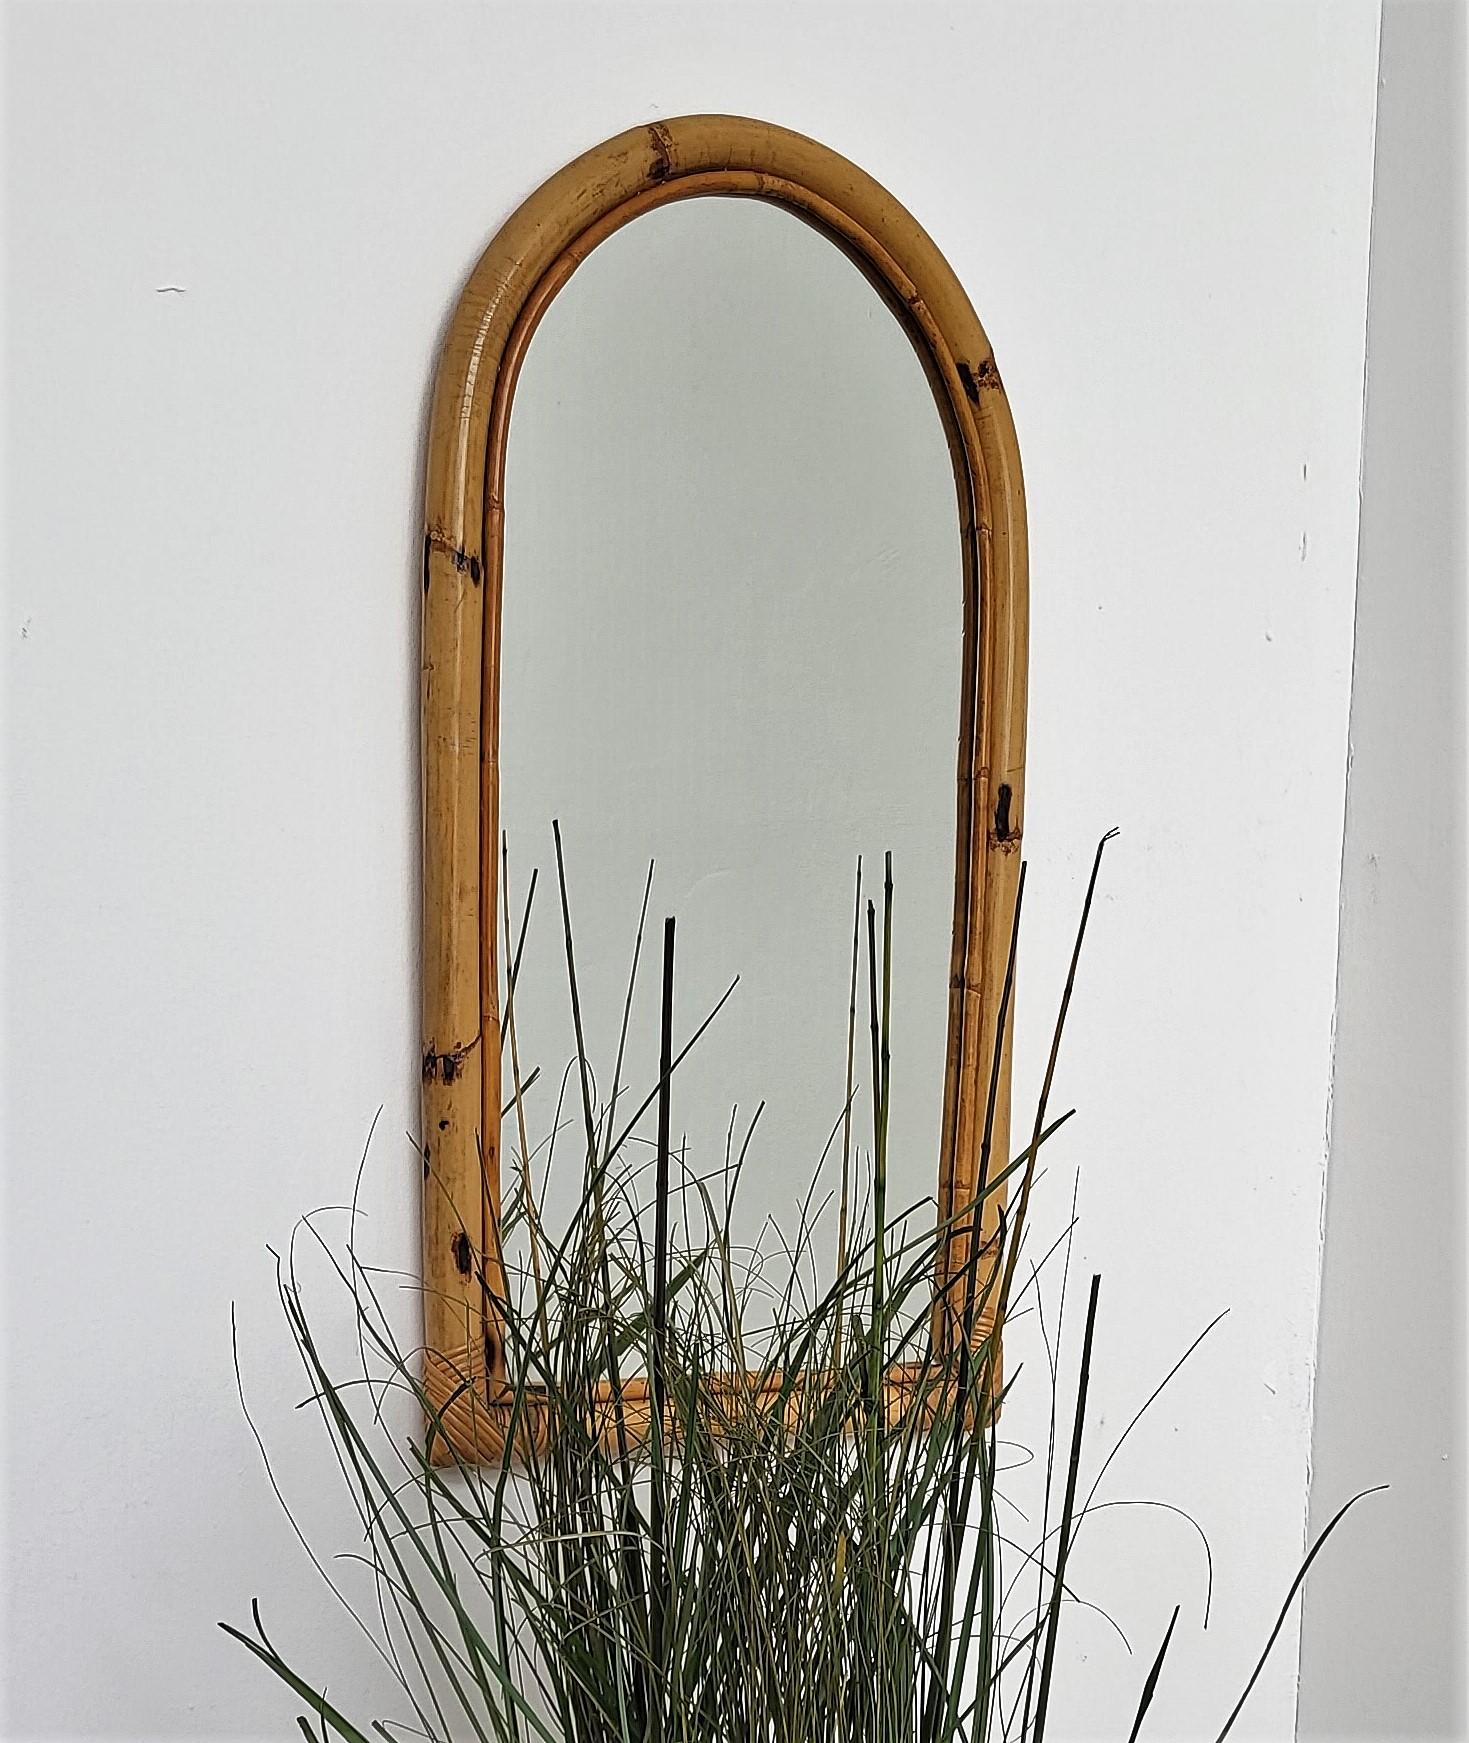 French Provincial 1960s Italian Bamboo Rattan Bohemian French Riviera Arched Wall Mirror